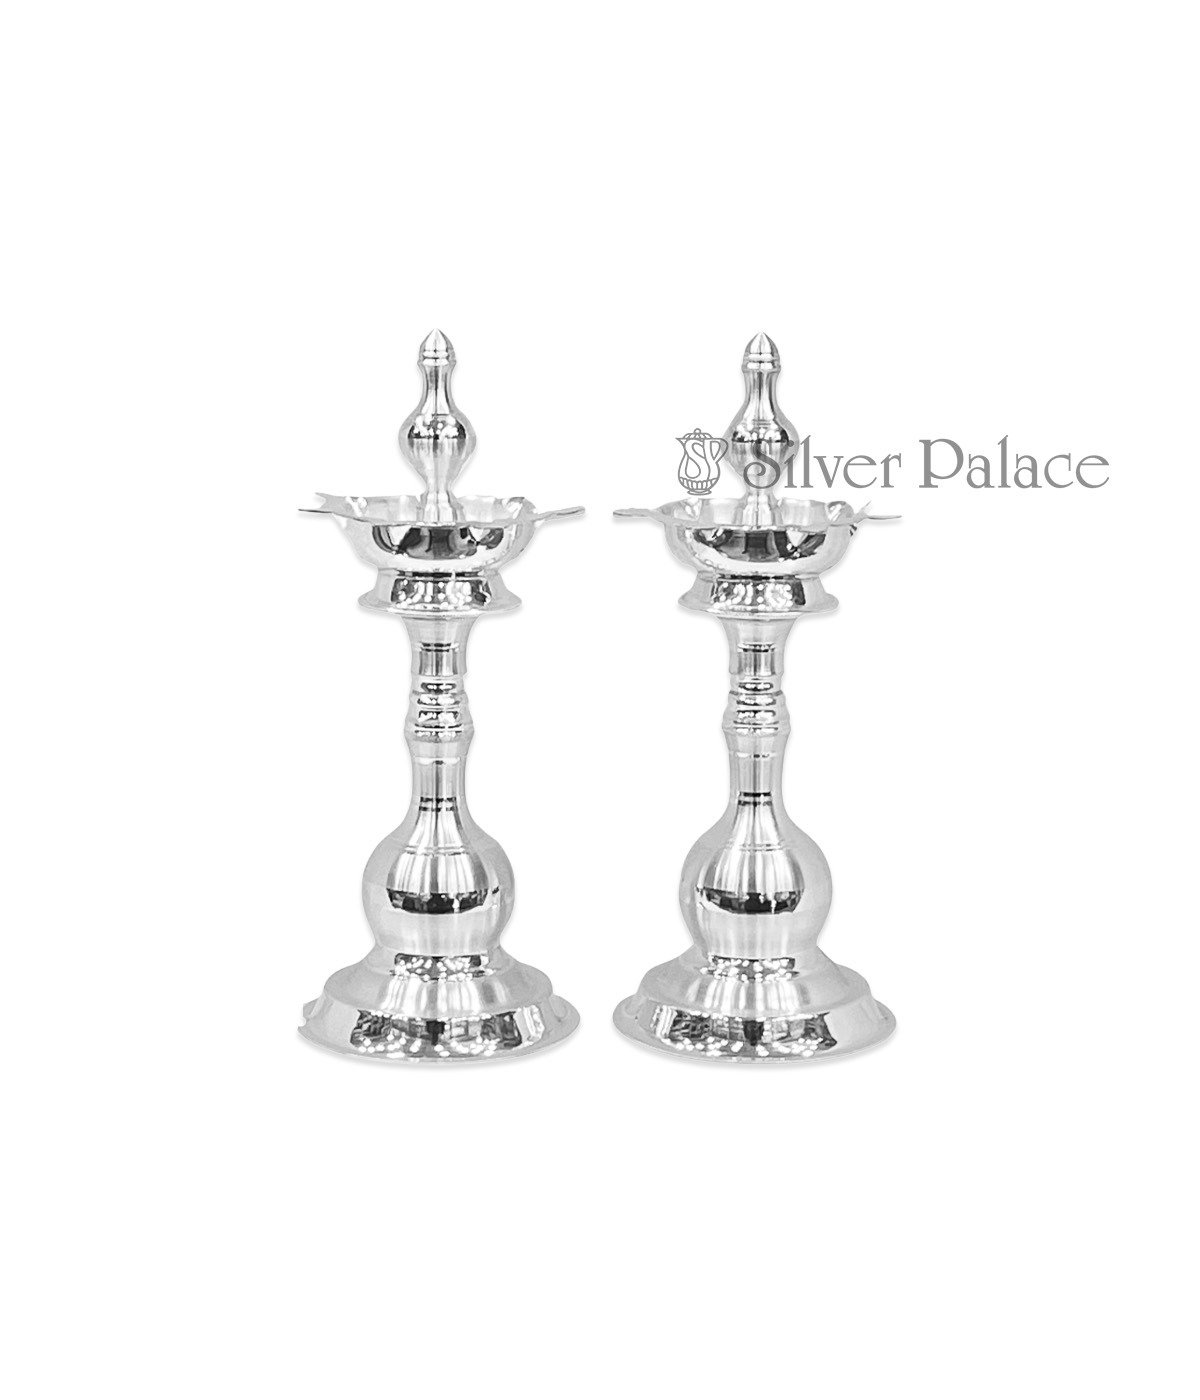 PURE SILVER TRADITIONAL POOJA SEVEN SPOUT LAMP IN SILVER